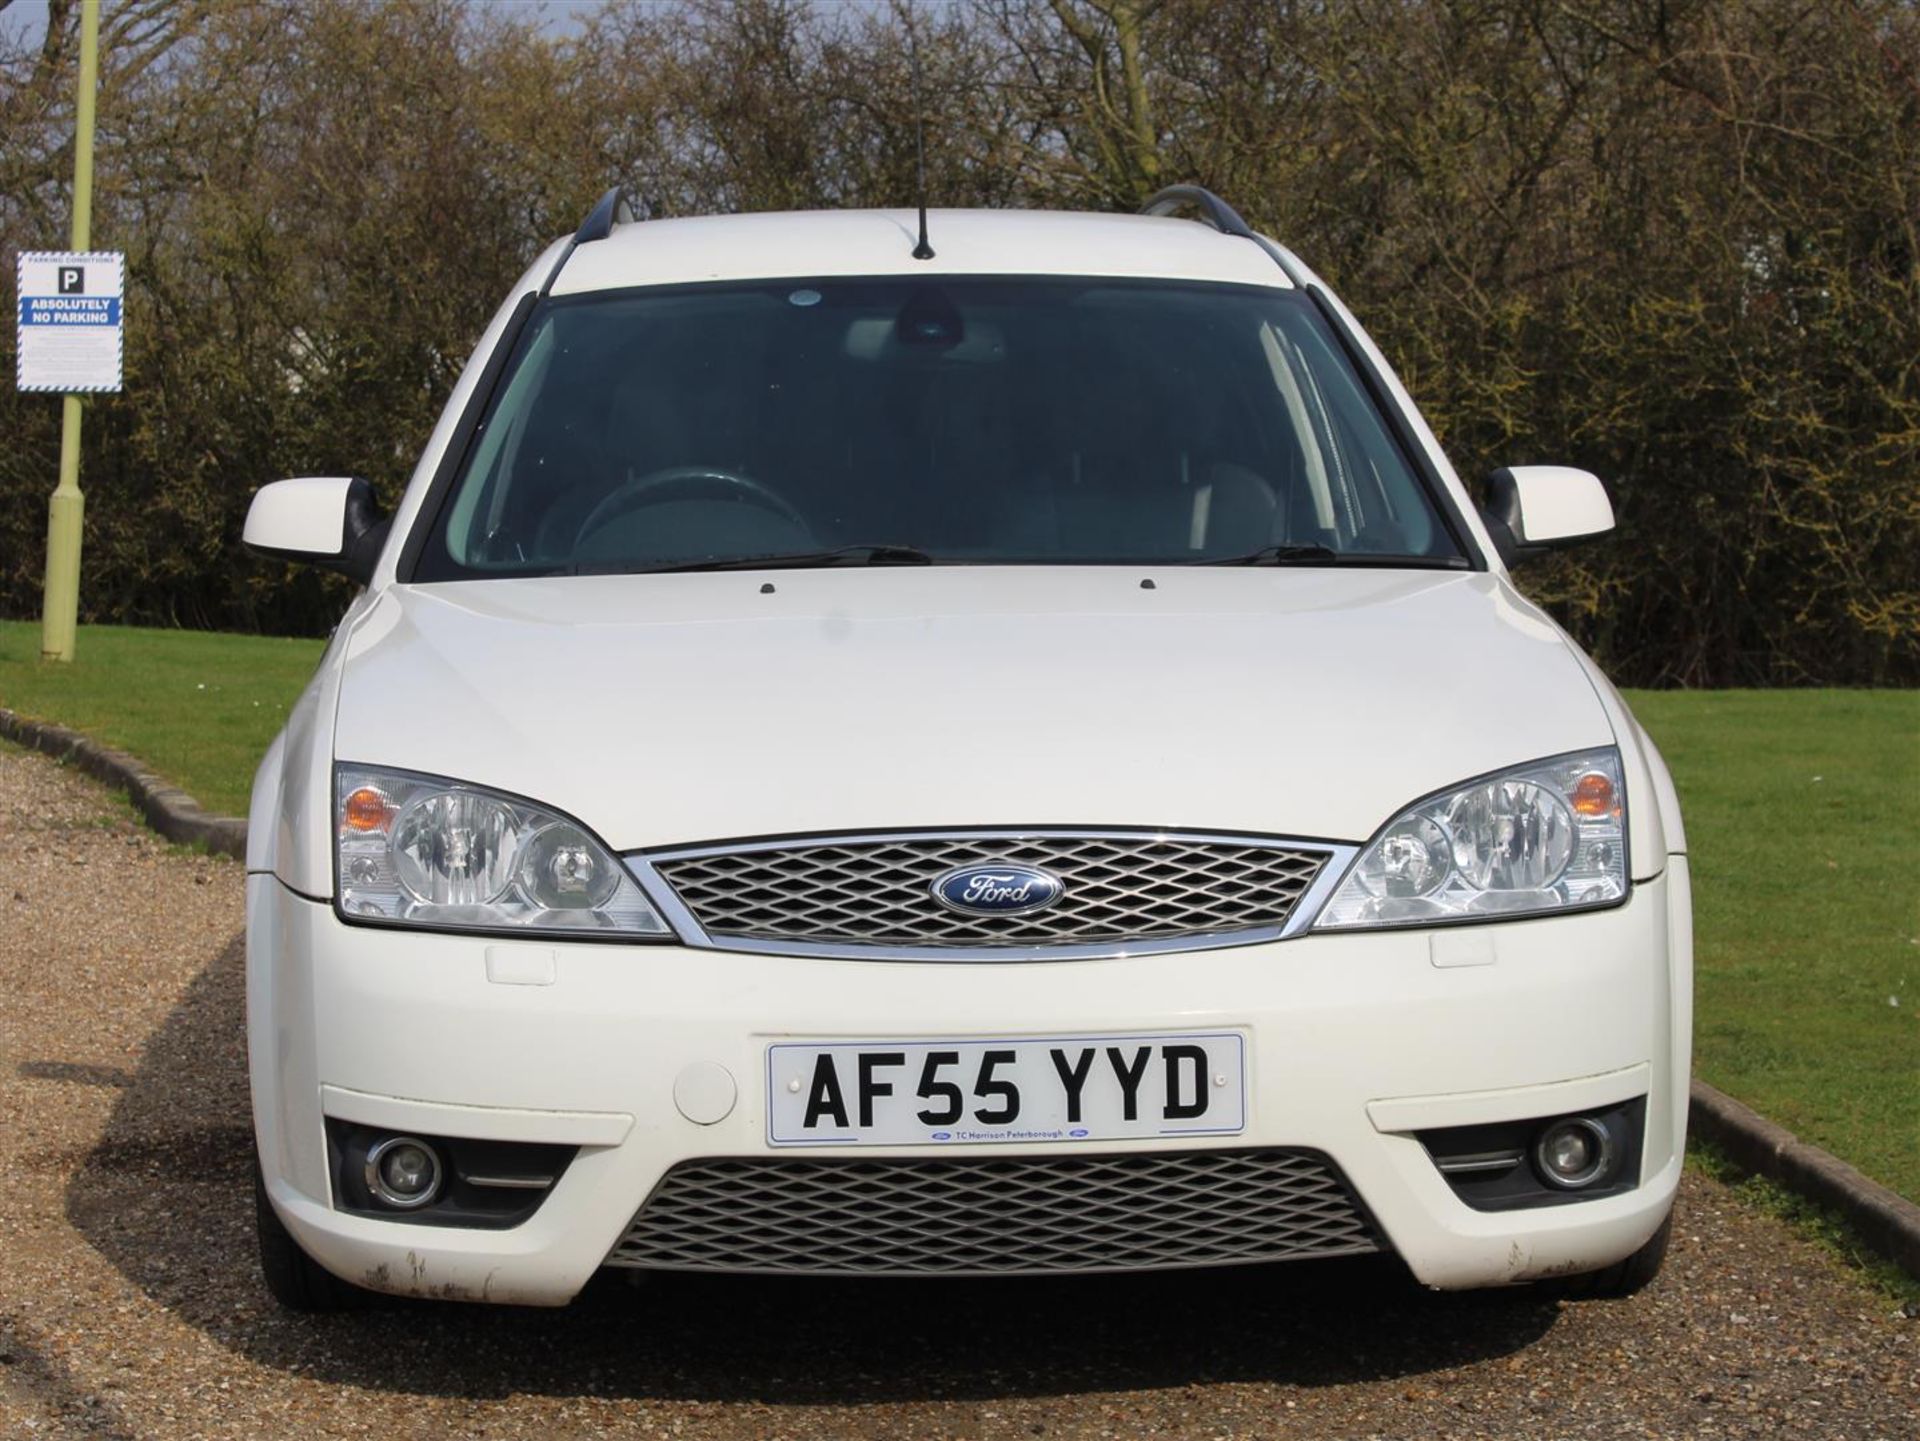 2005 Ford Mondeo ST220 Estate - Image 2 of 19